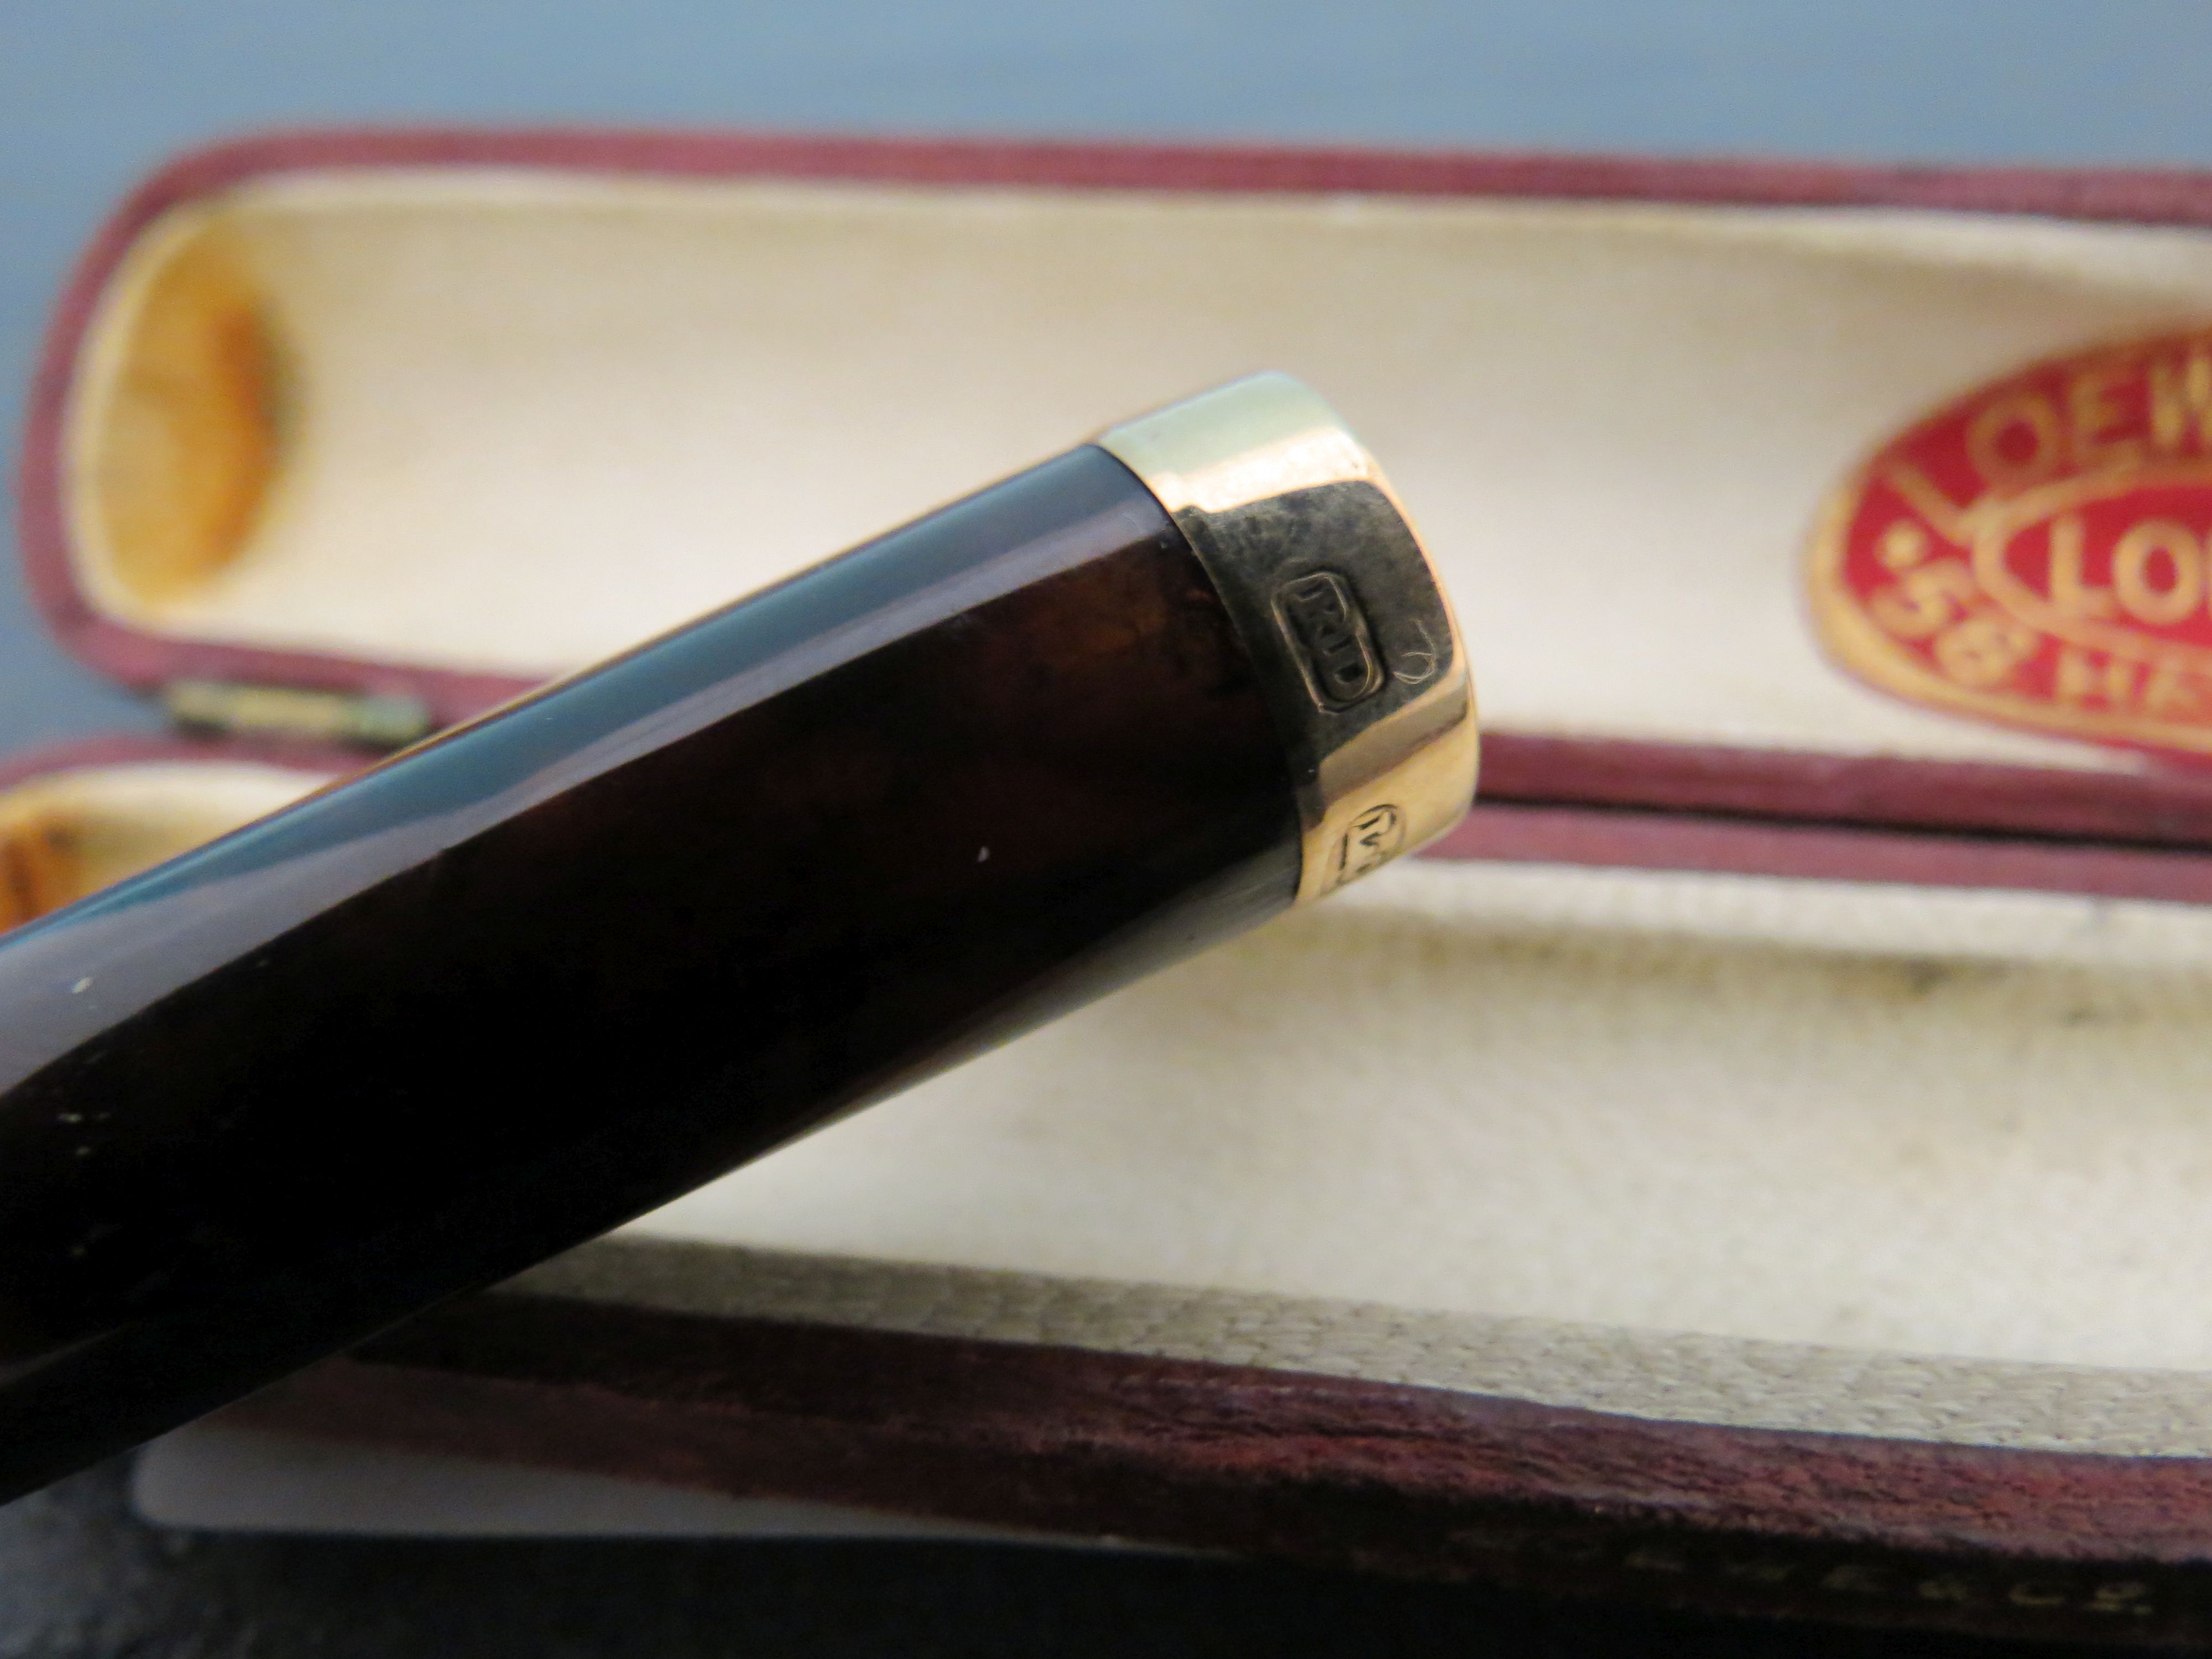 Cased Loewe and co tortoise shell cheroot holder with gold end cap - Image 3 of 4